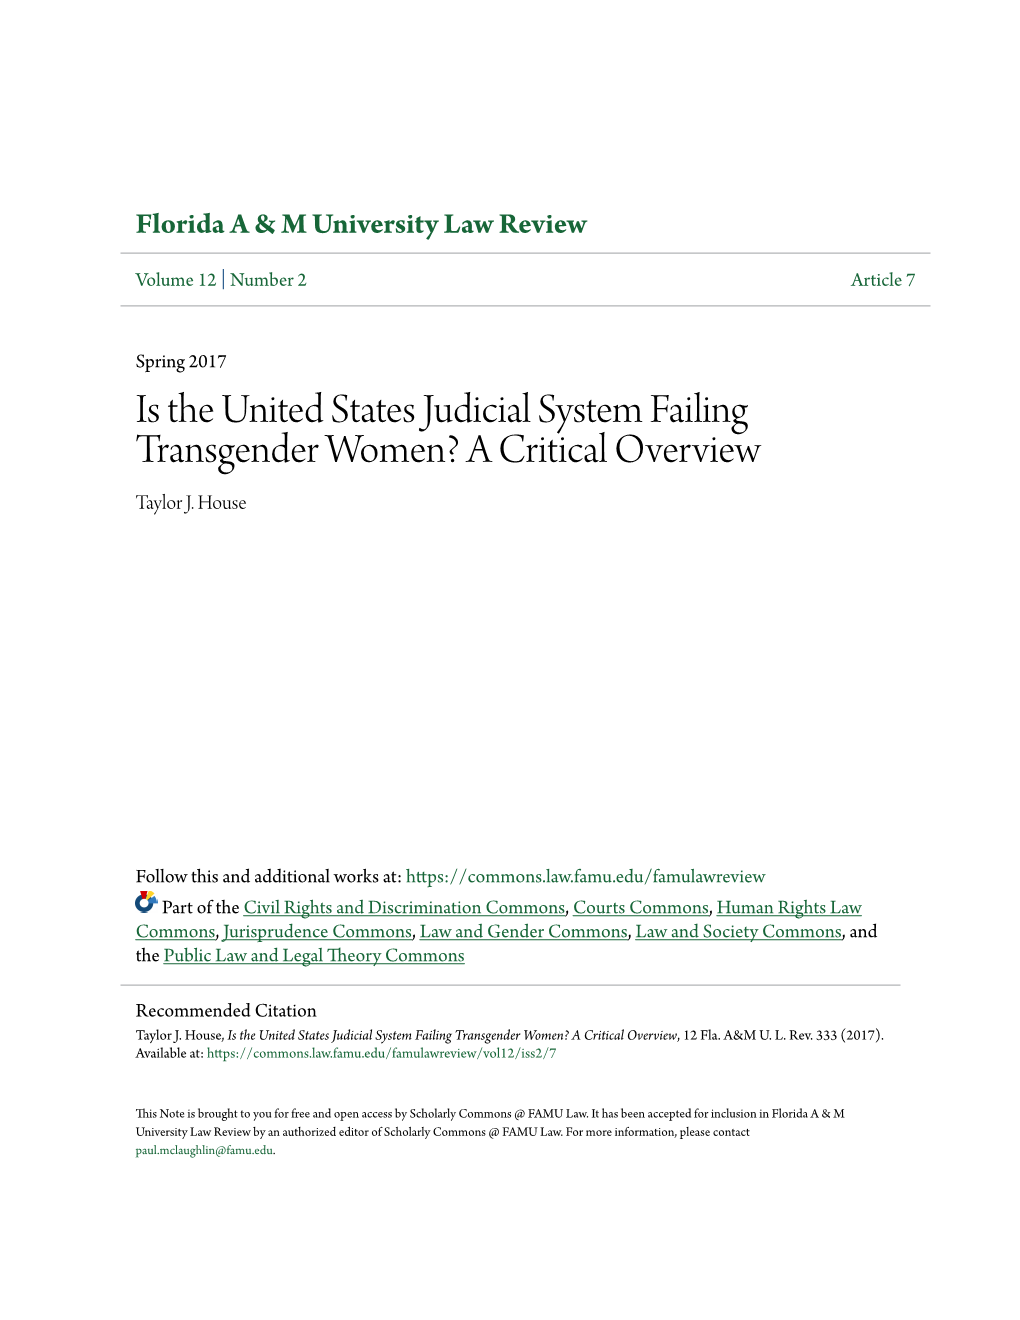 Is the United States Judicial System Failing Transgender Women? a Critical Overview Taylor J